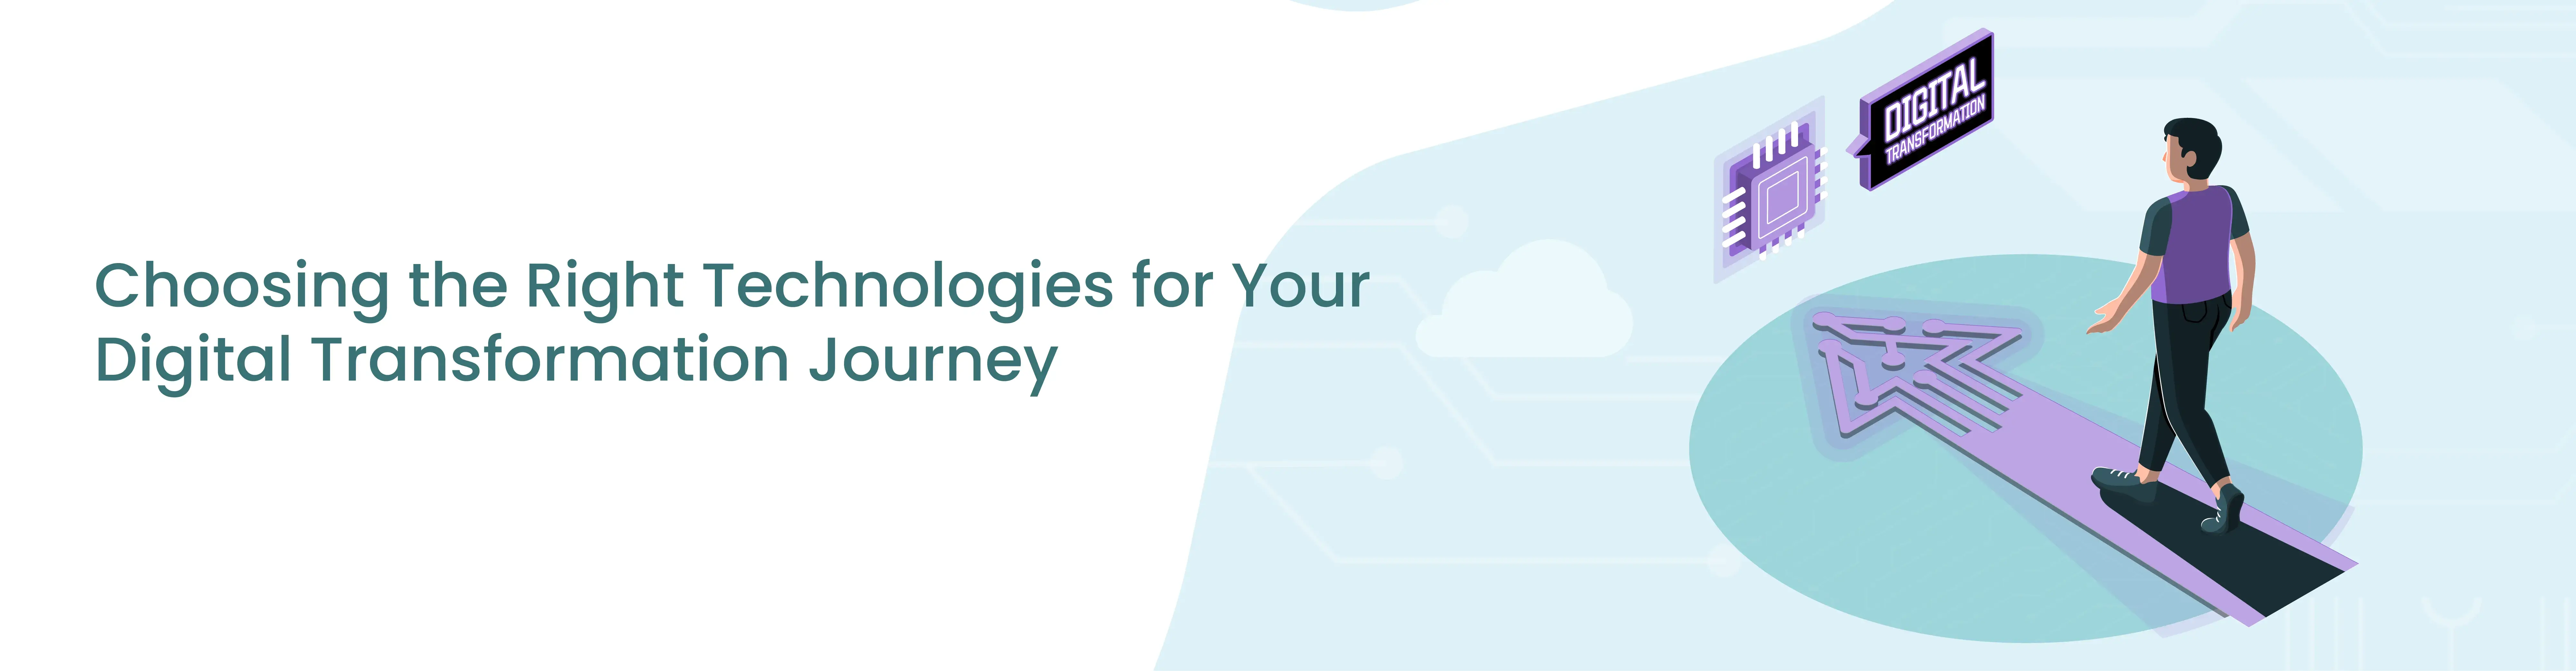 1712297394Choosing the Right Technologies for Your Digital Transformation Journey.webp